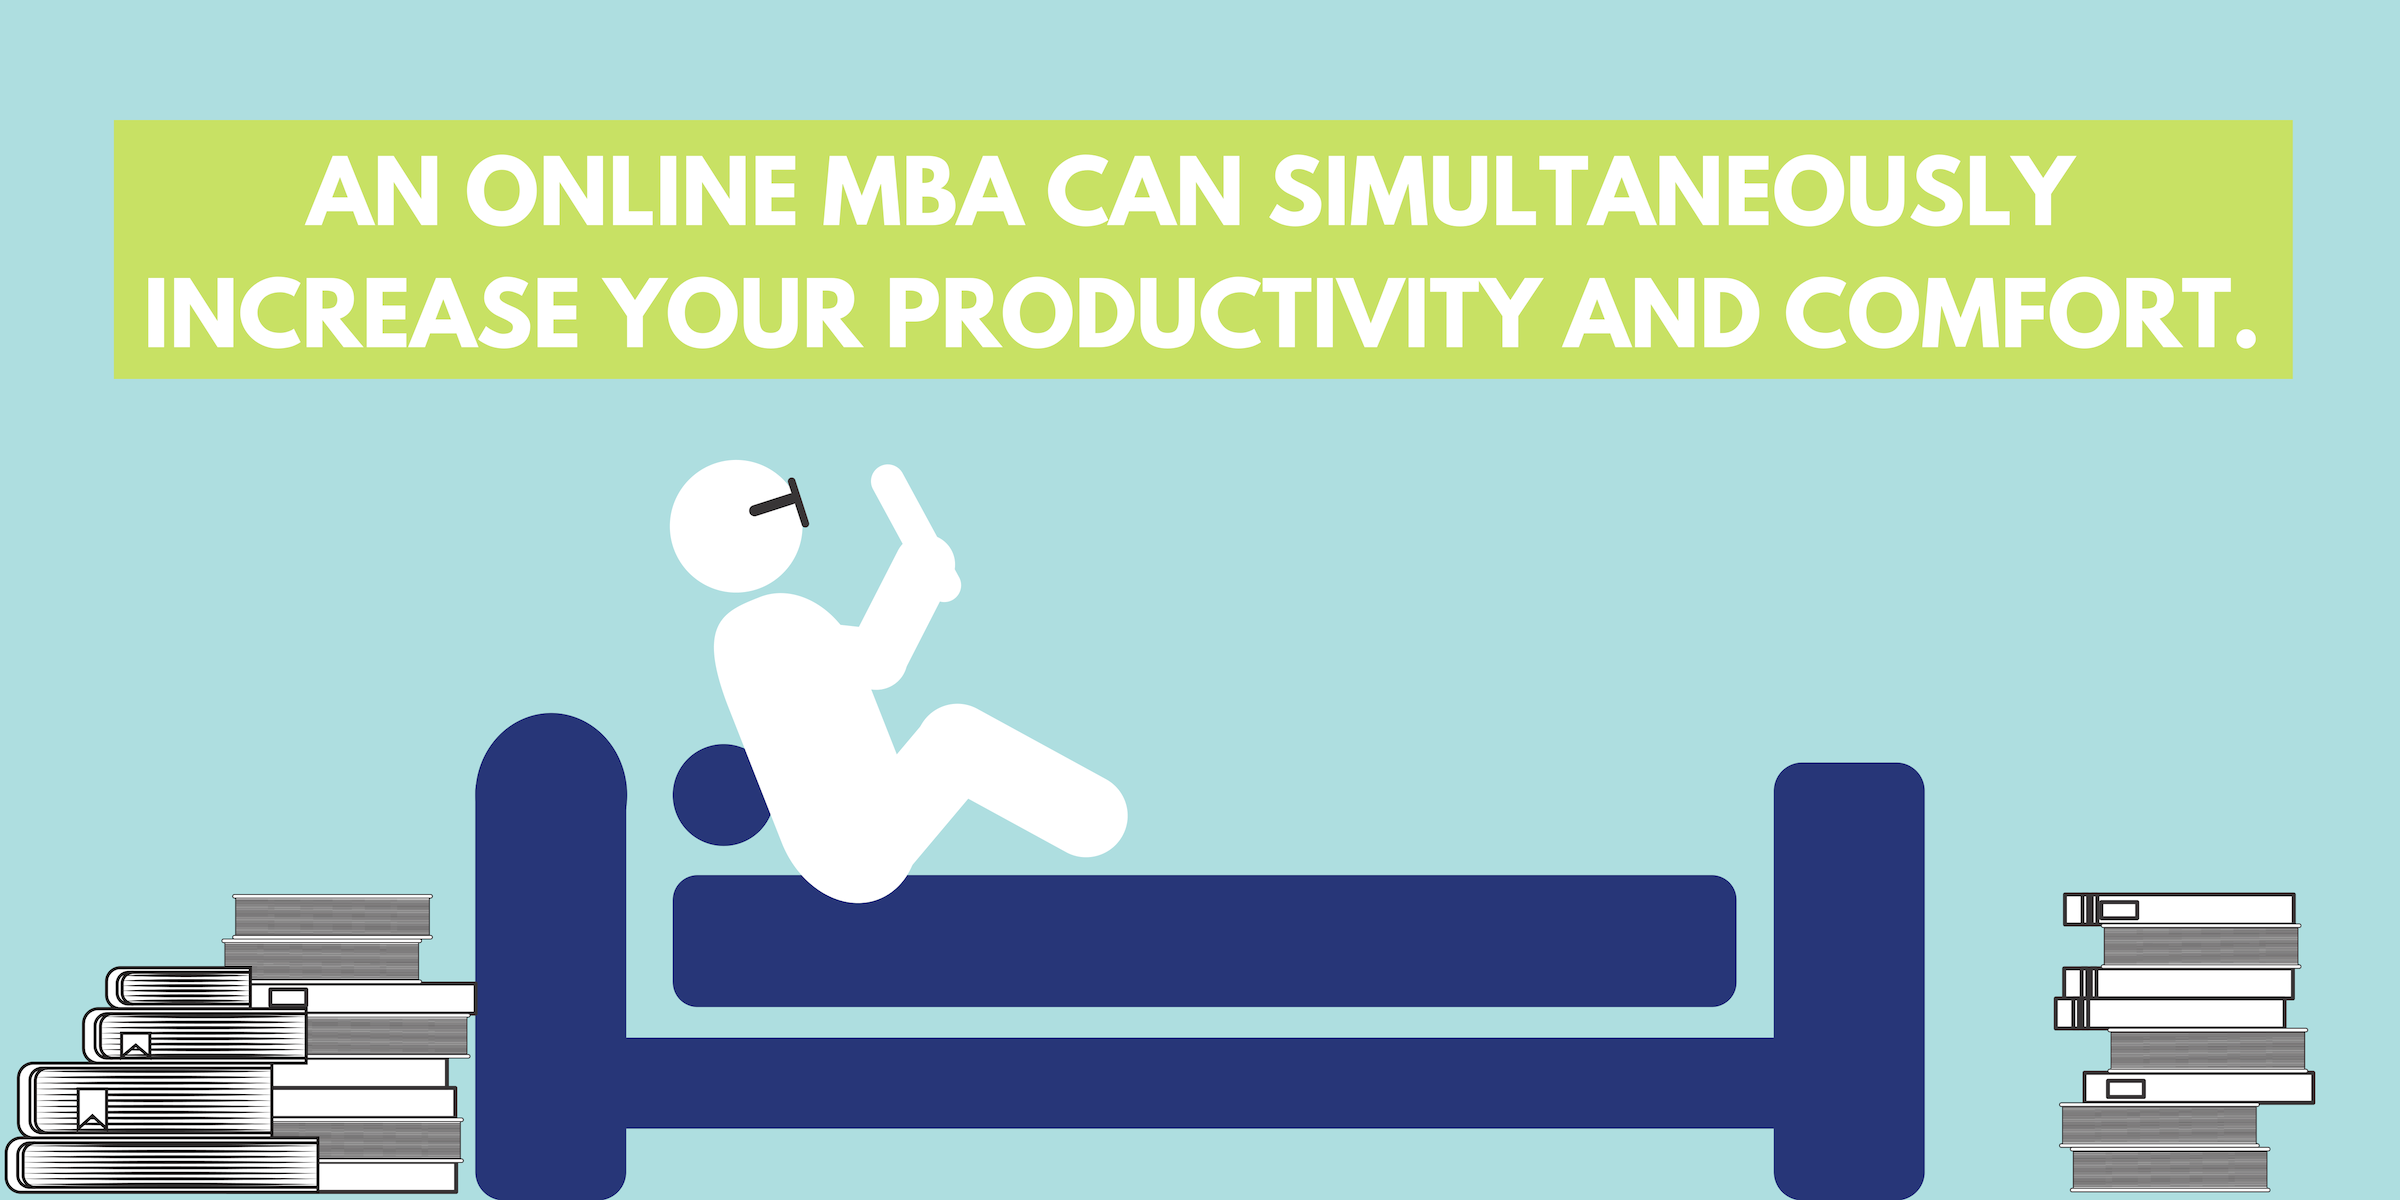 An online MBA can simultaneously increase your productivity and comfort.